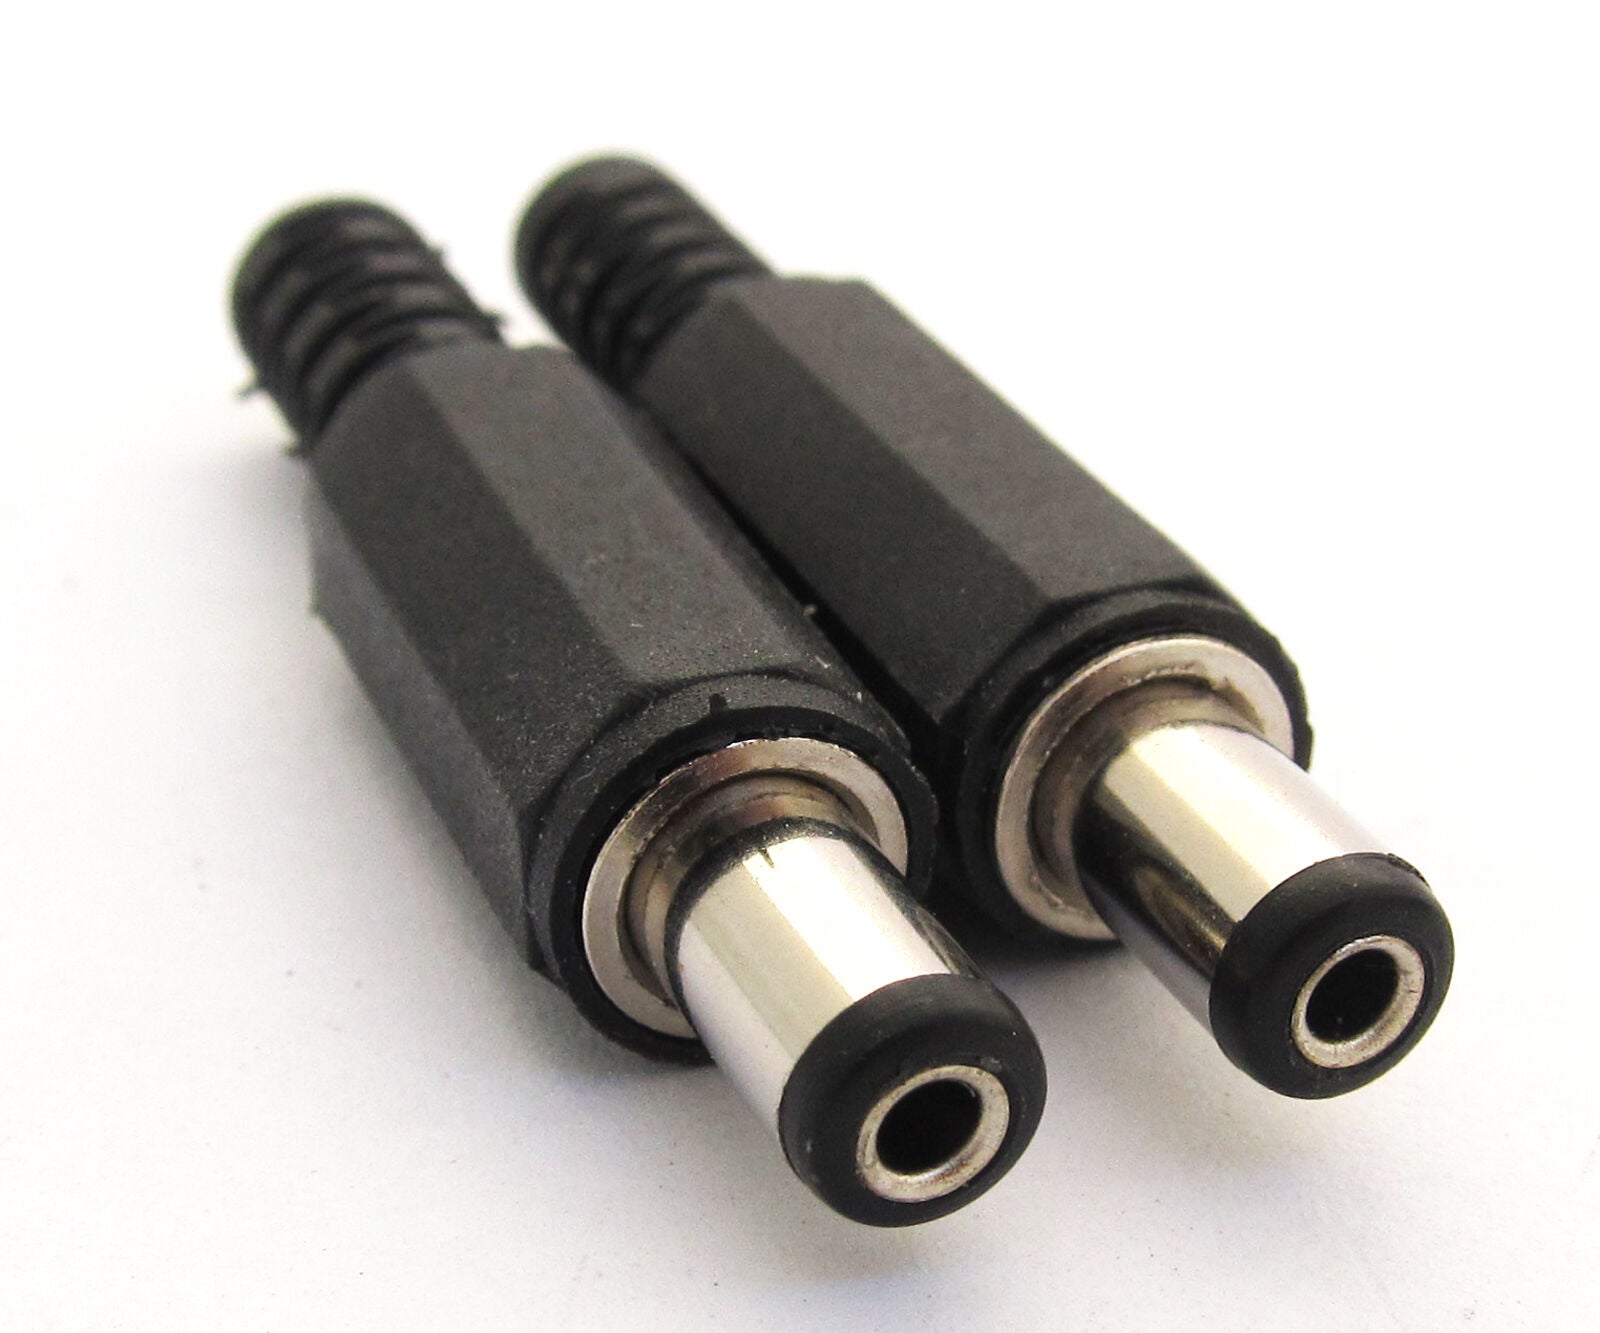 1pc 2.1x5.5mm 2.1mm DC Power Male Plug Soldering Connector Plastic Cover Black